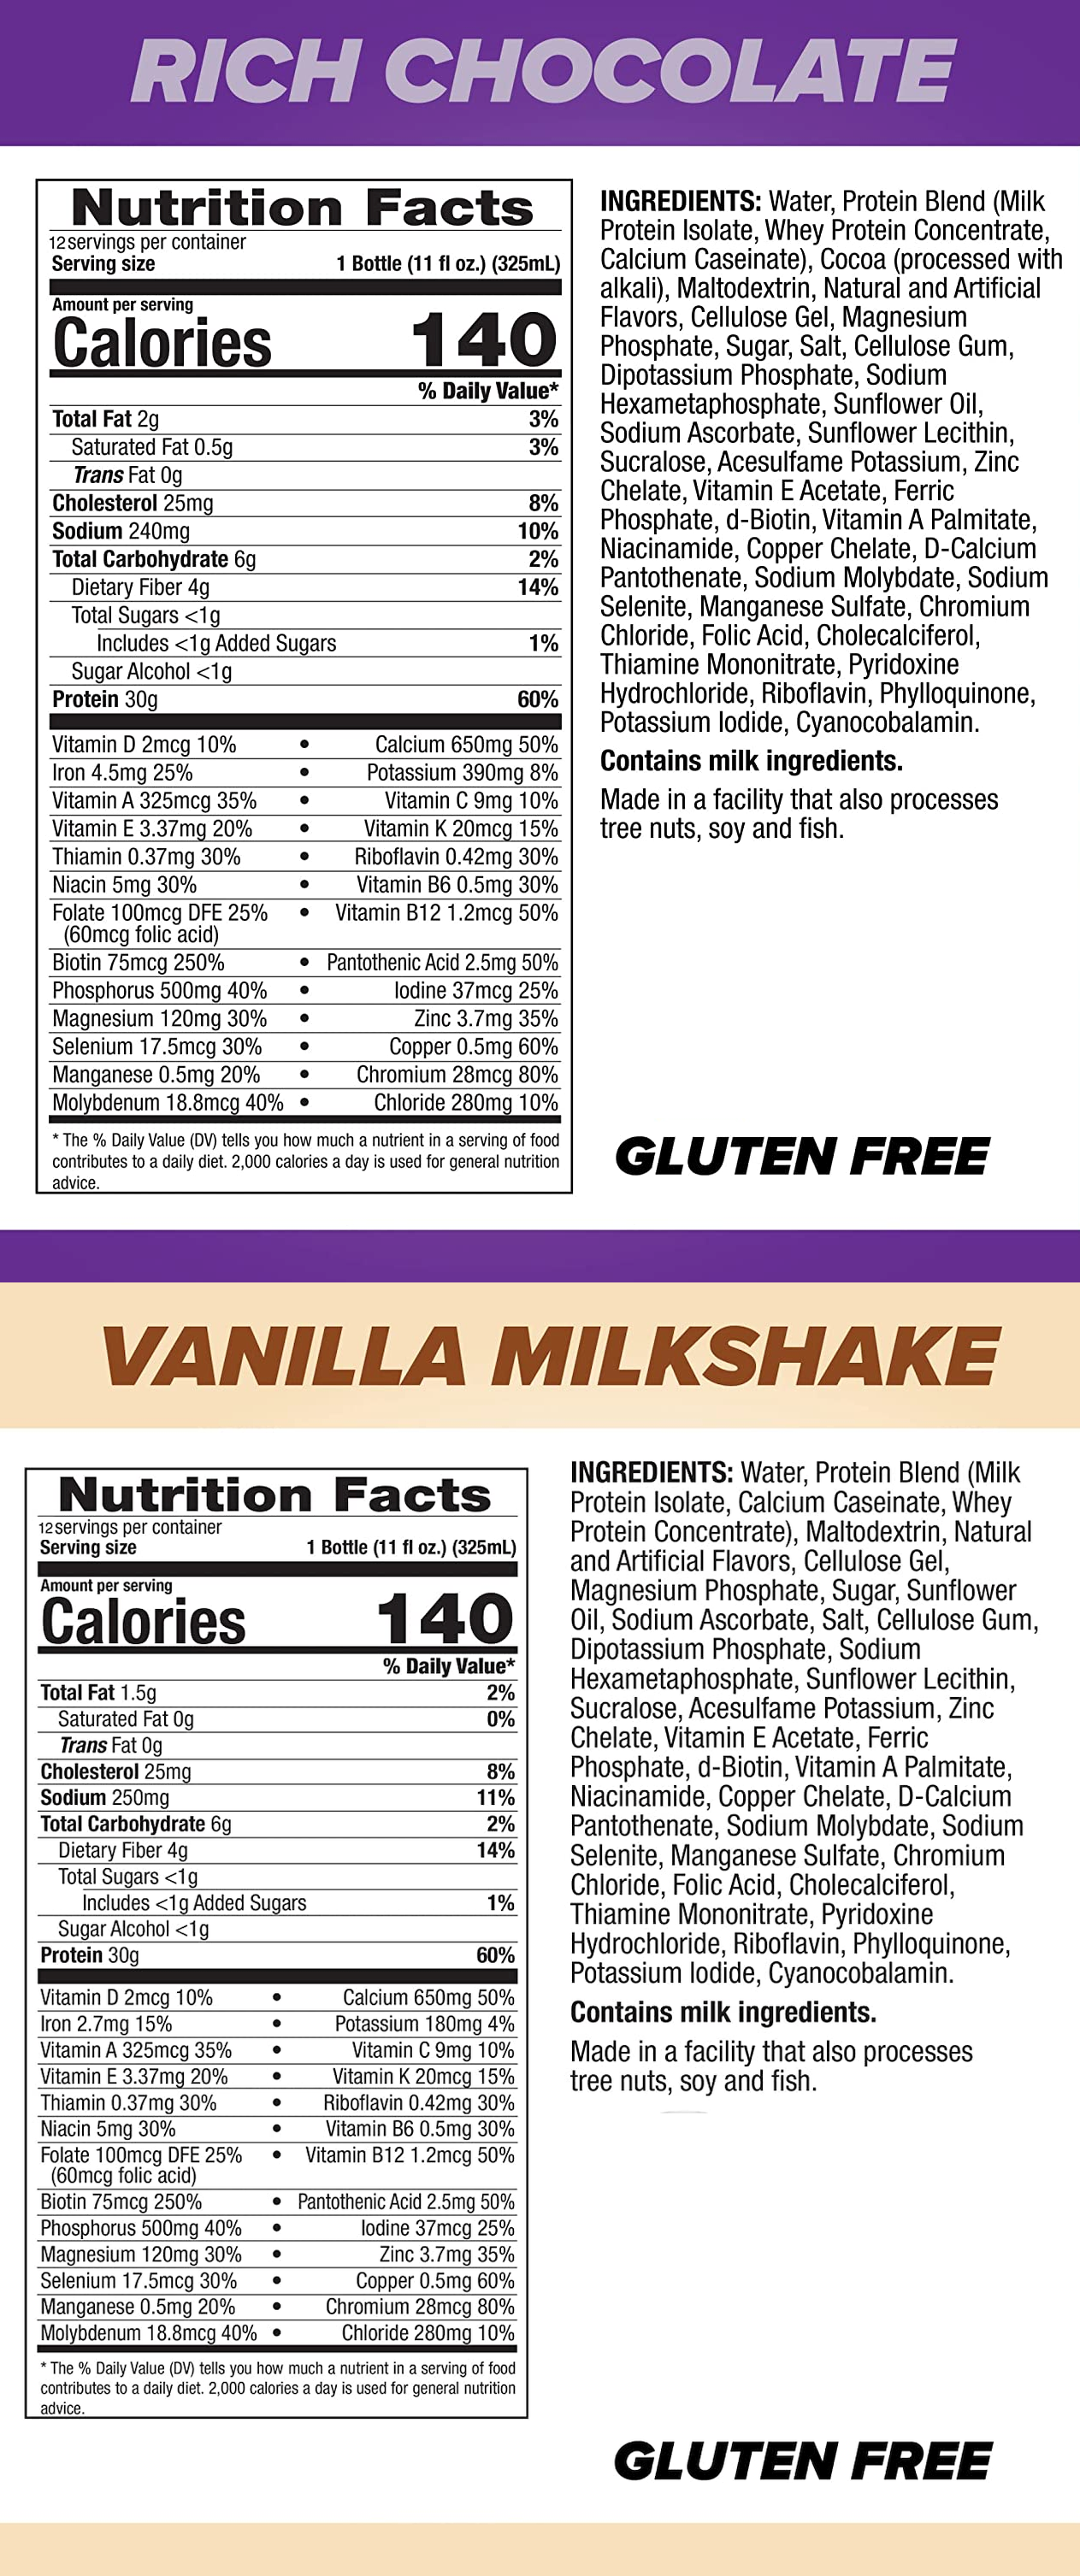 Summary: Nutrition information for a Rich Chocolate drink with 12 servings per container. Each 325 mL serving contains 30g protein, vitamins, minerals, and under 1g of sugar.